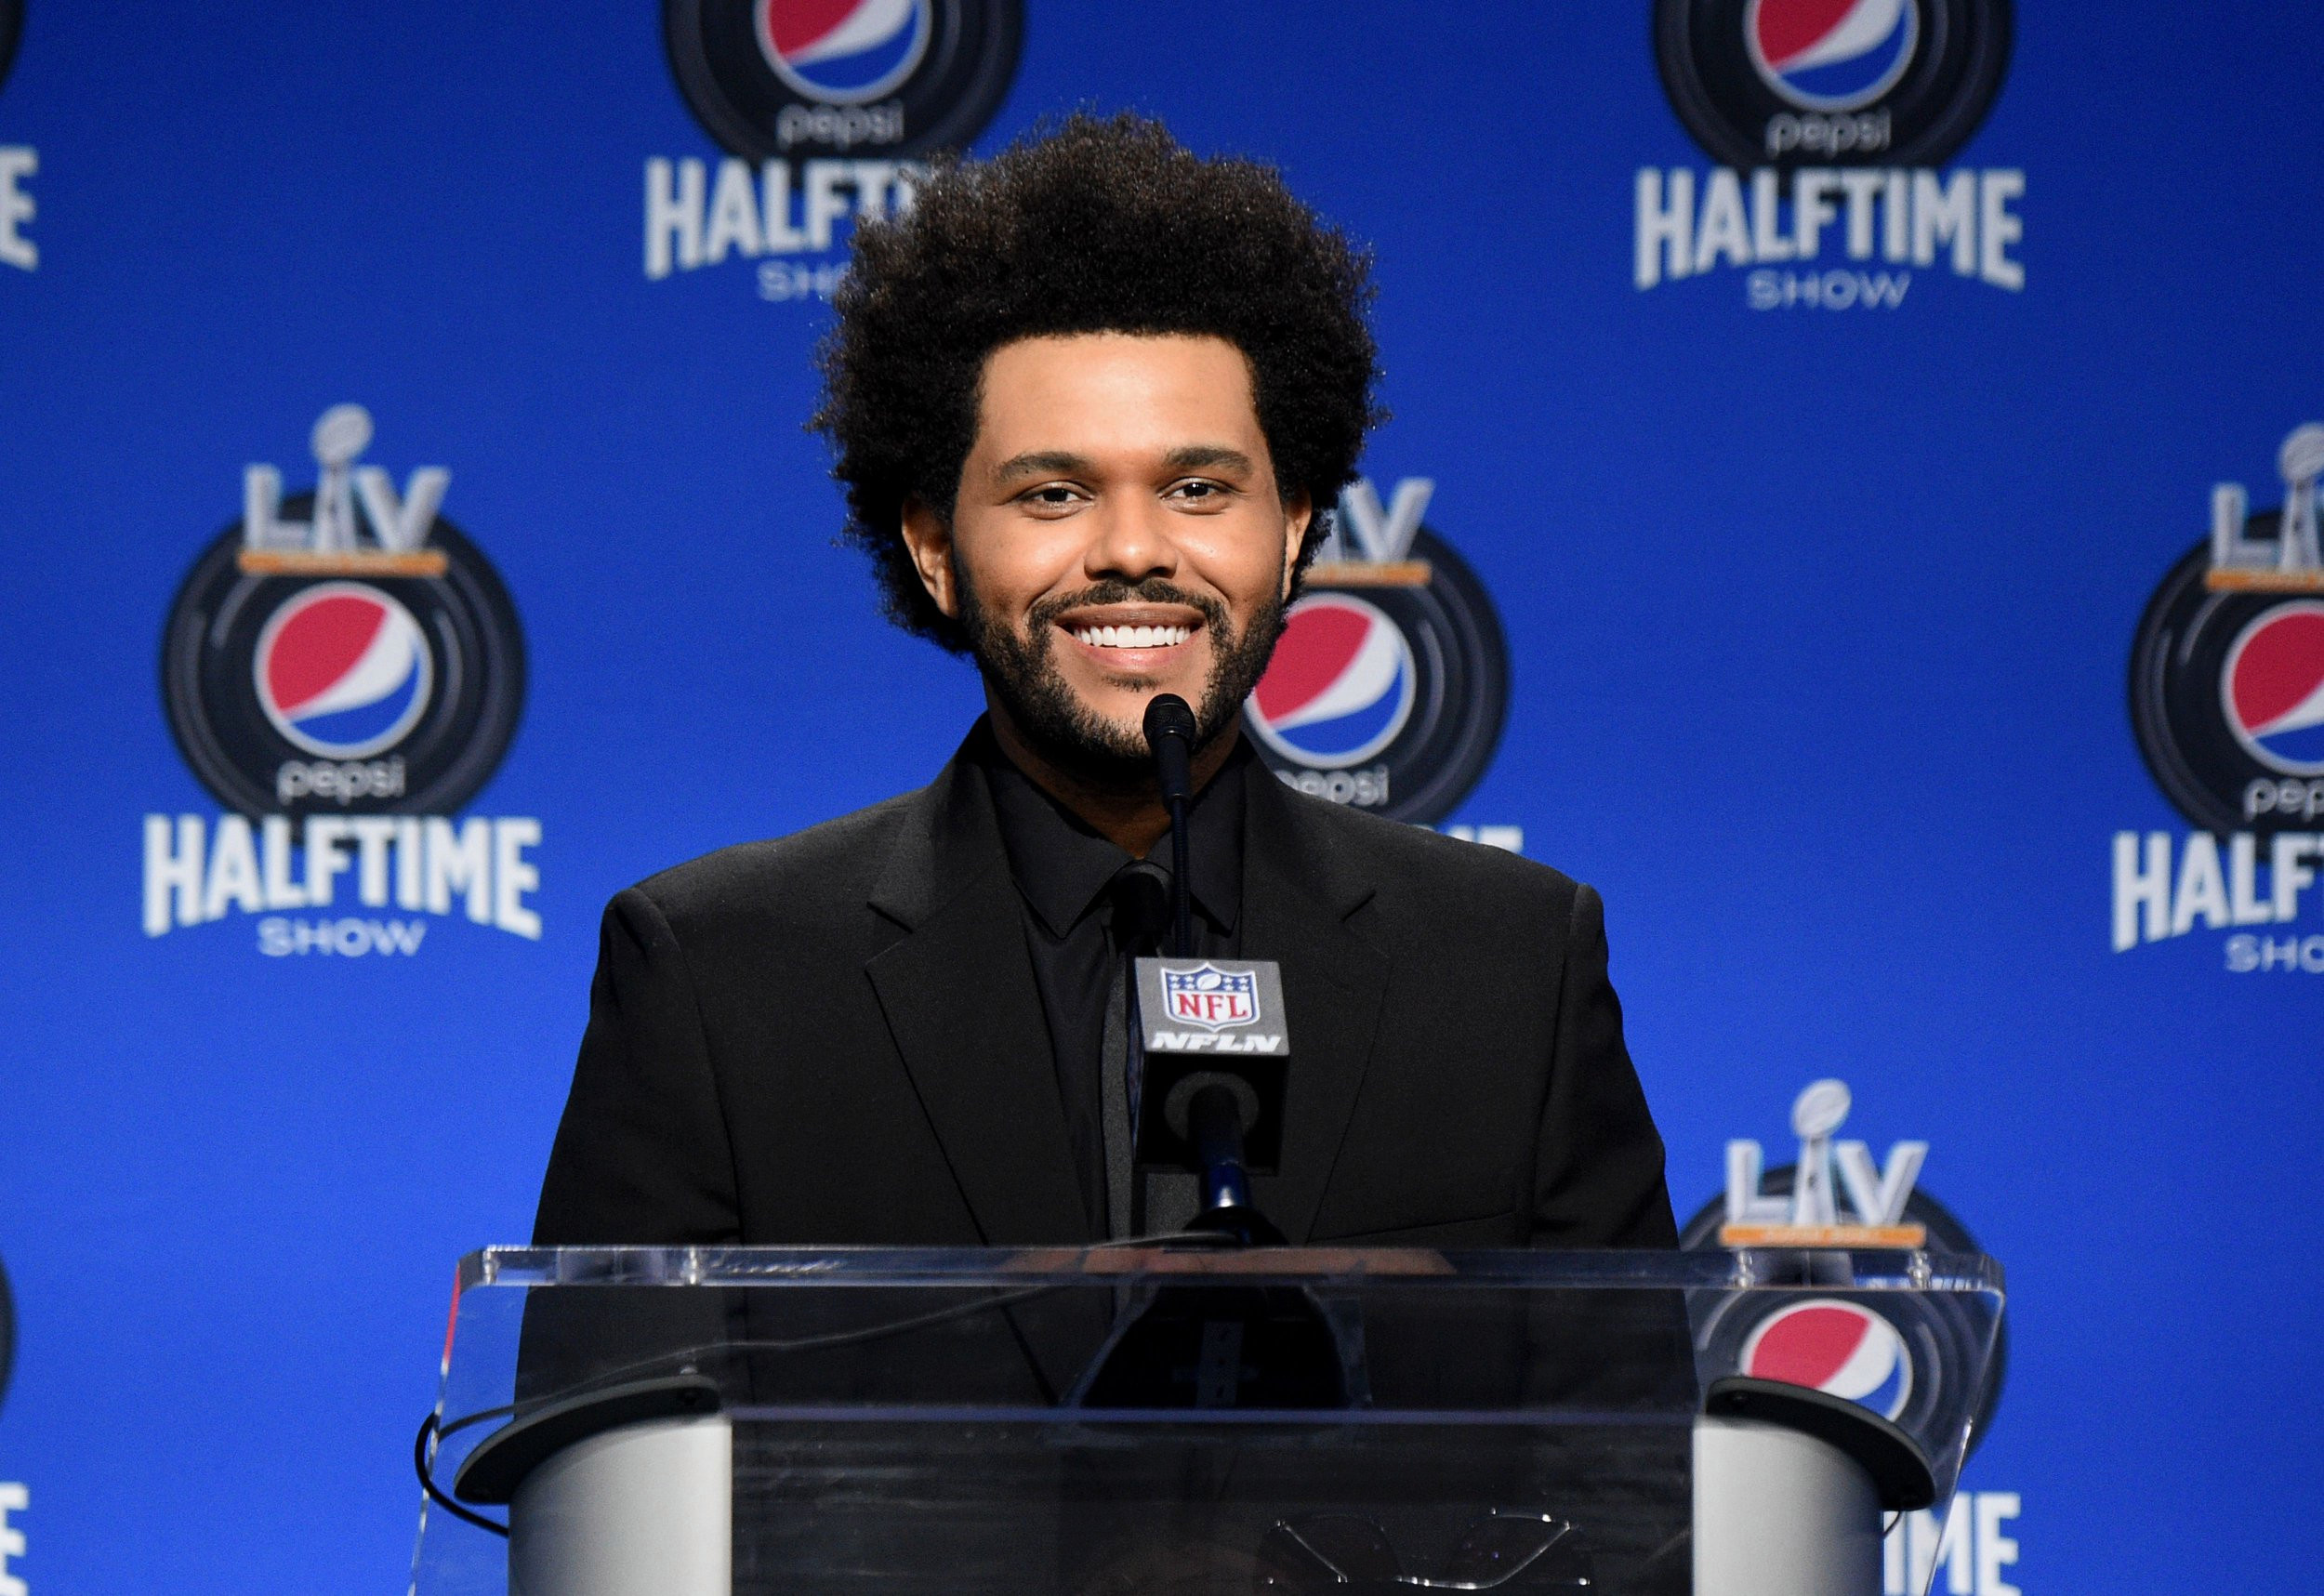 The Weeknd promises ‘respectful’ Super Bowl halftime show after years of nip slips and scandal